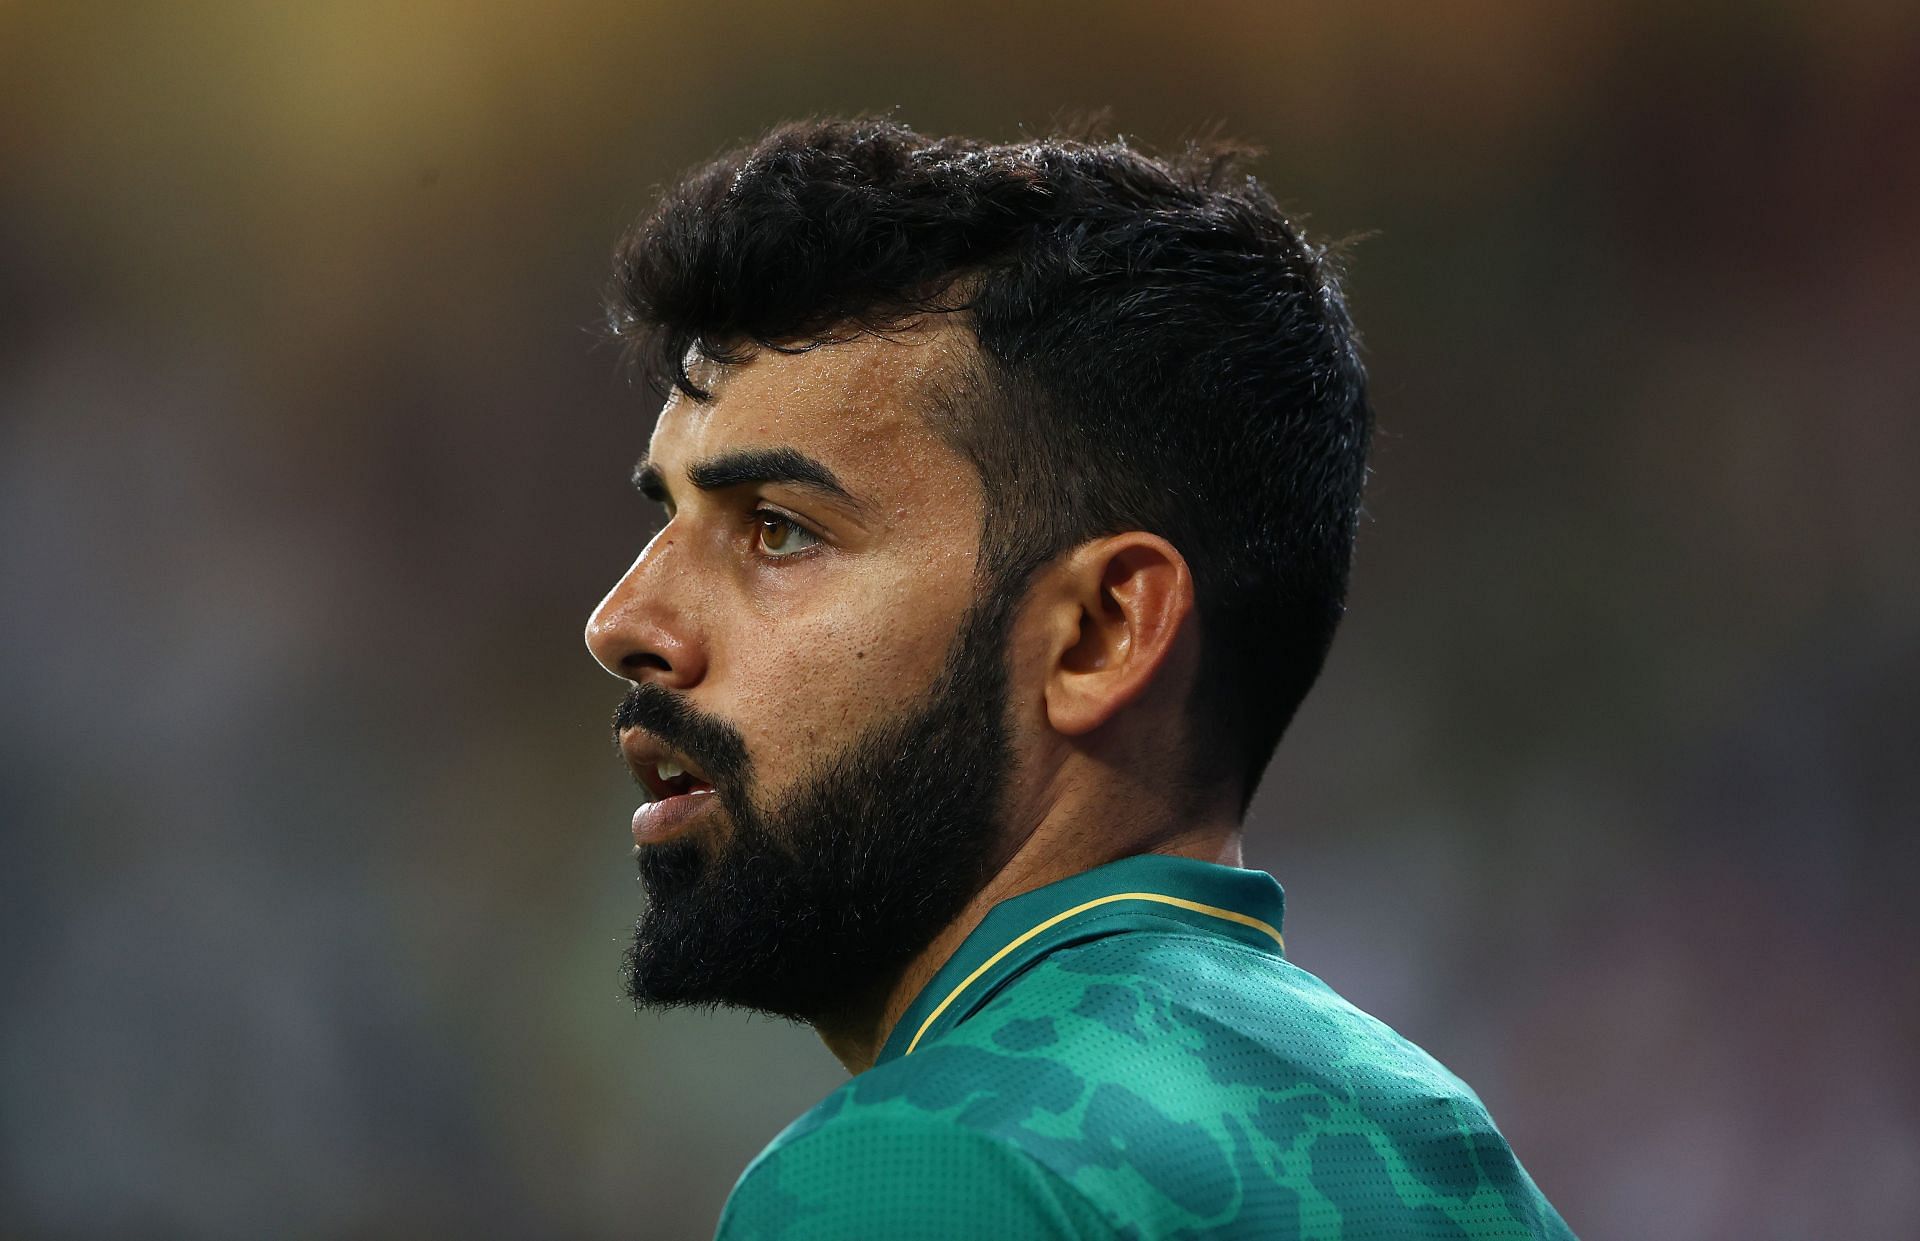 Shadab Khan looked very impressive when he first appeared on the international scene, in 2018